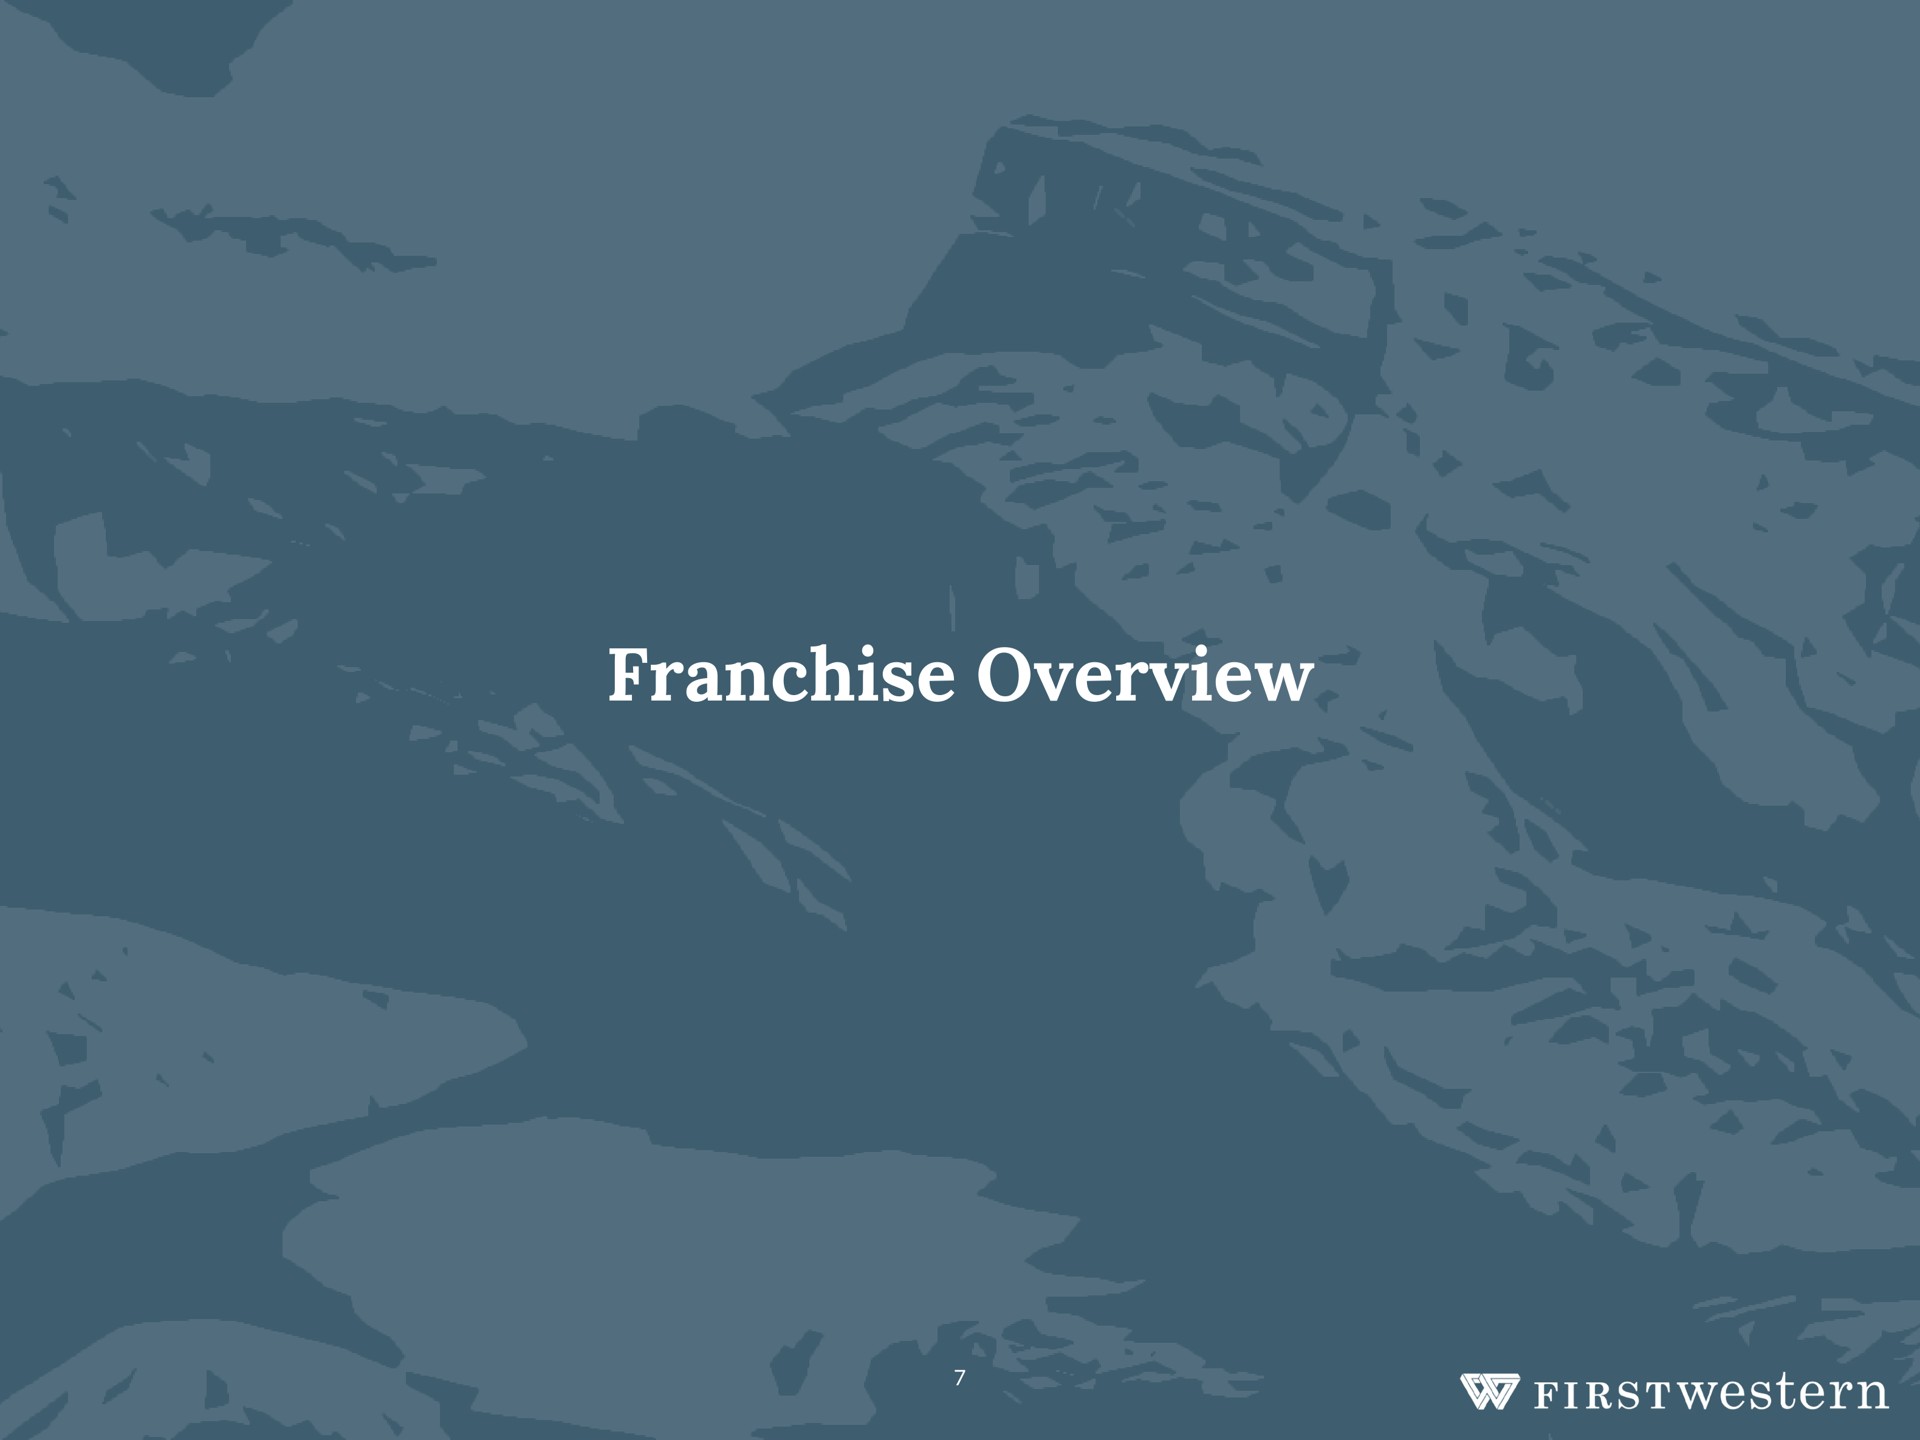 franchise overview | First Western Financial